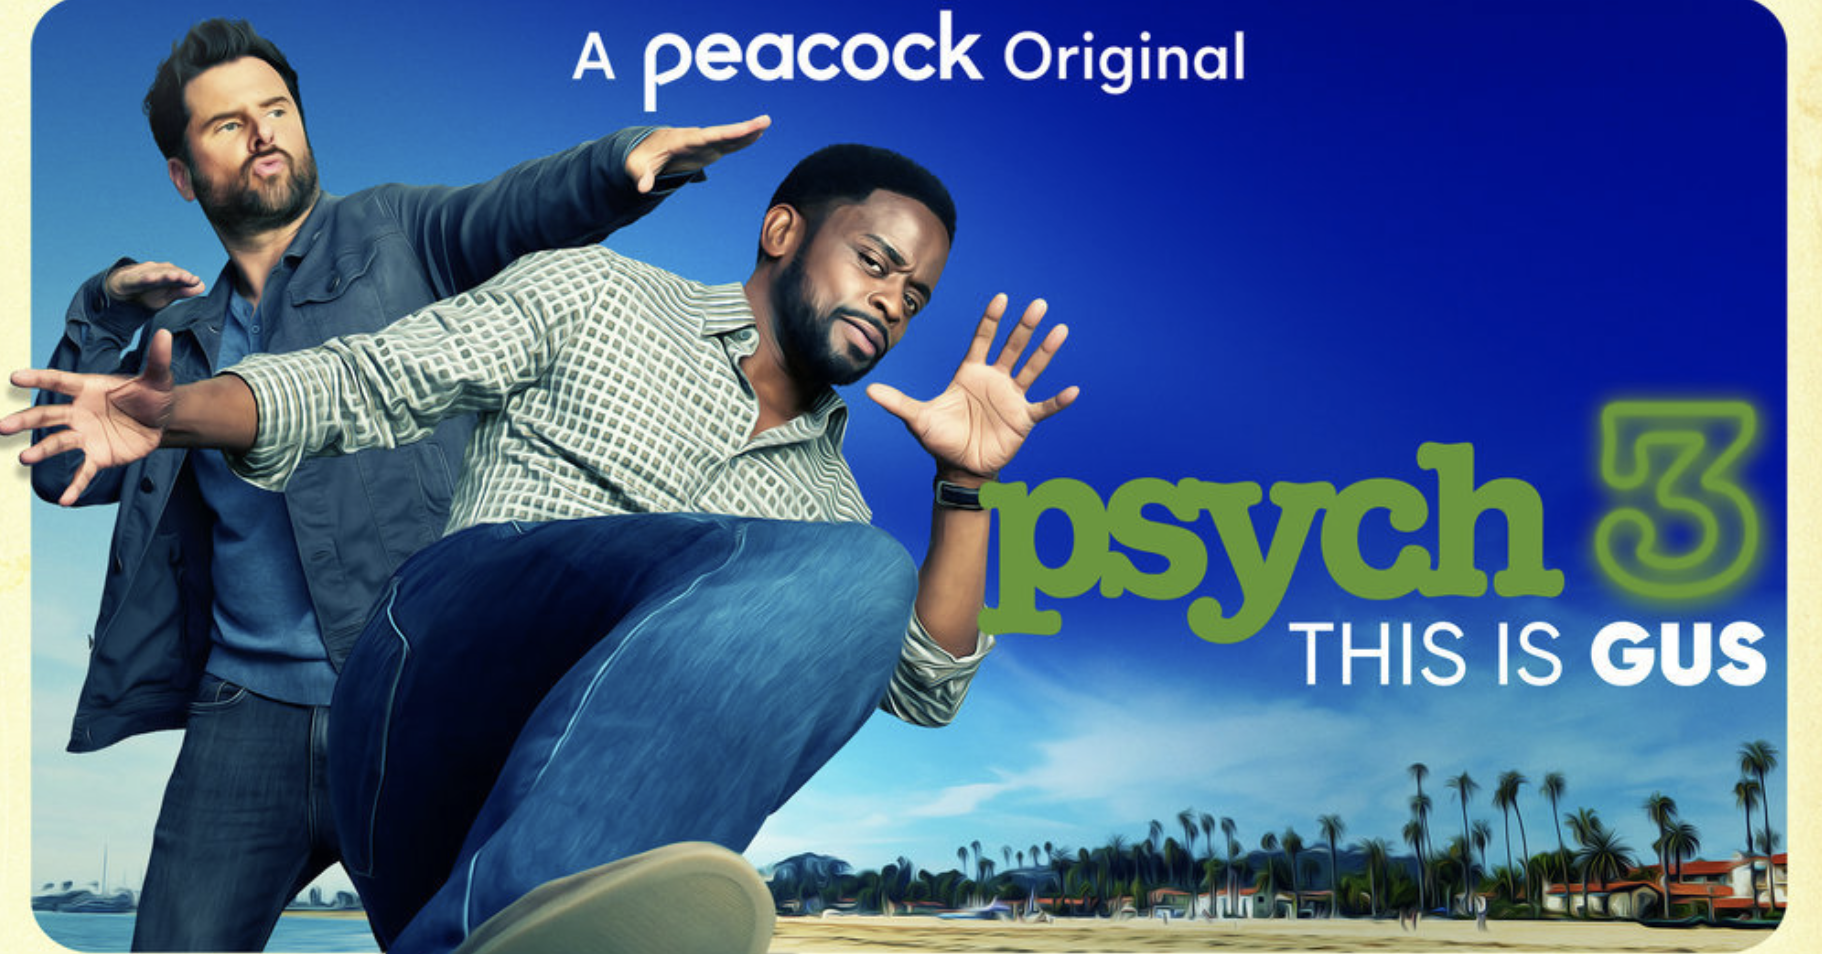 Psych 3 | Allen Maldonado Talks About Joining the Franchise [Exclusive Interview]